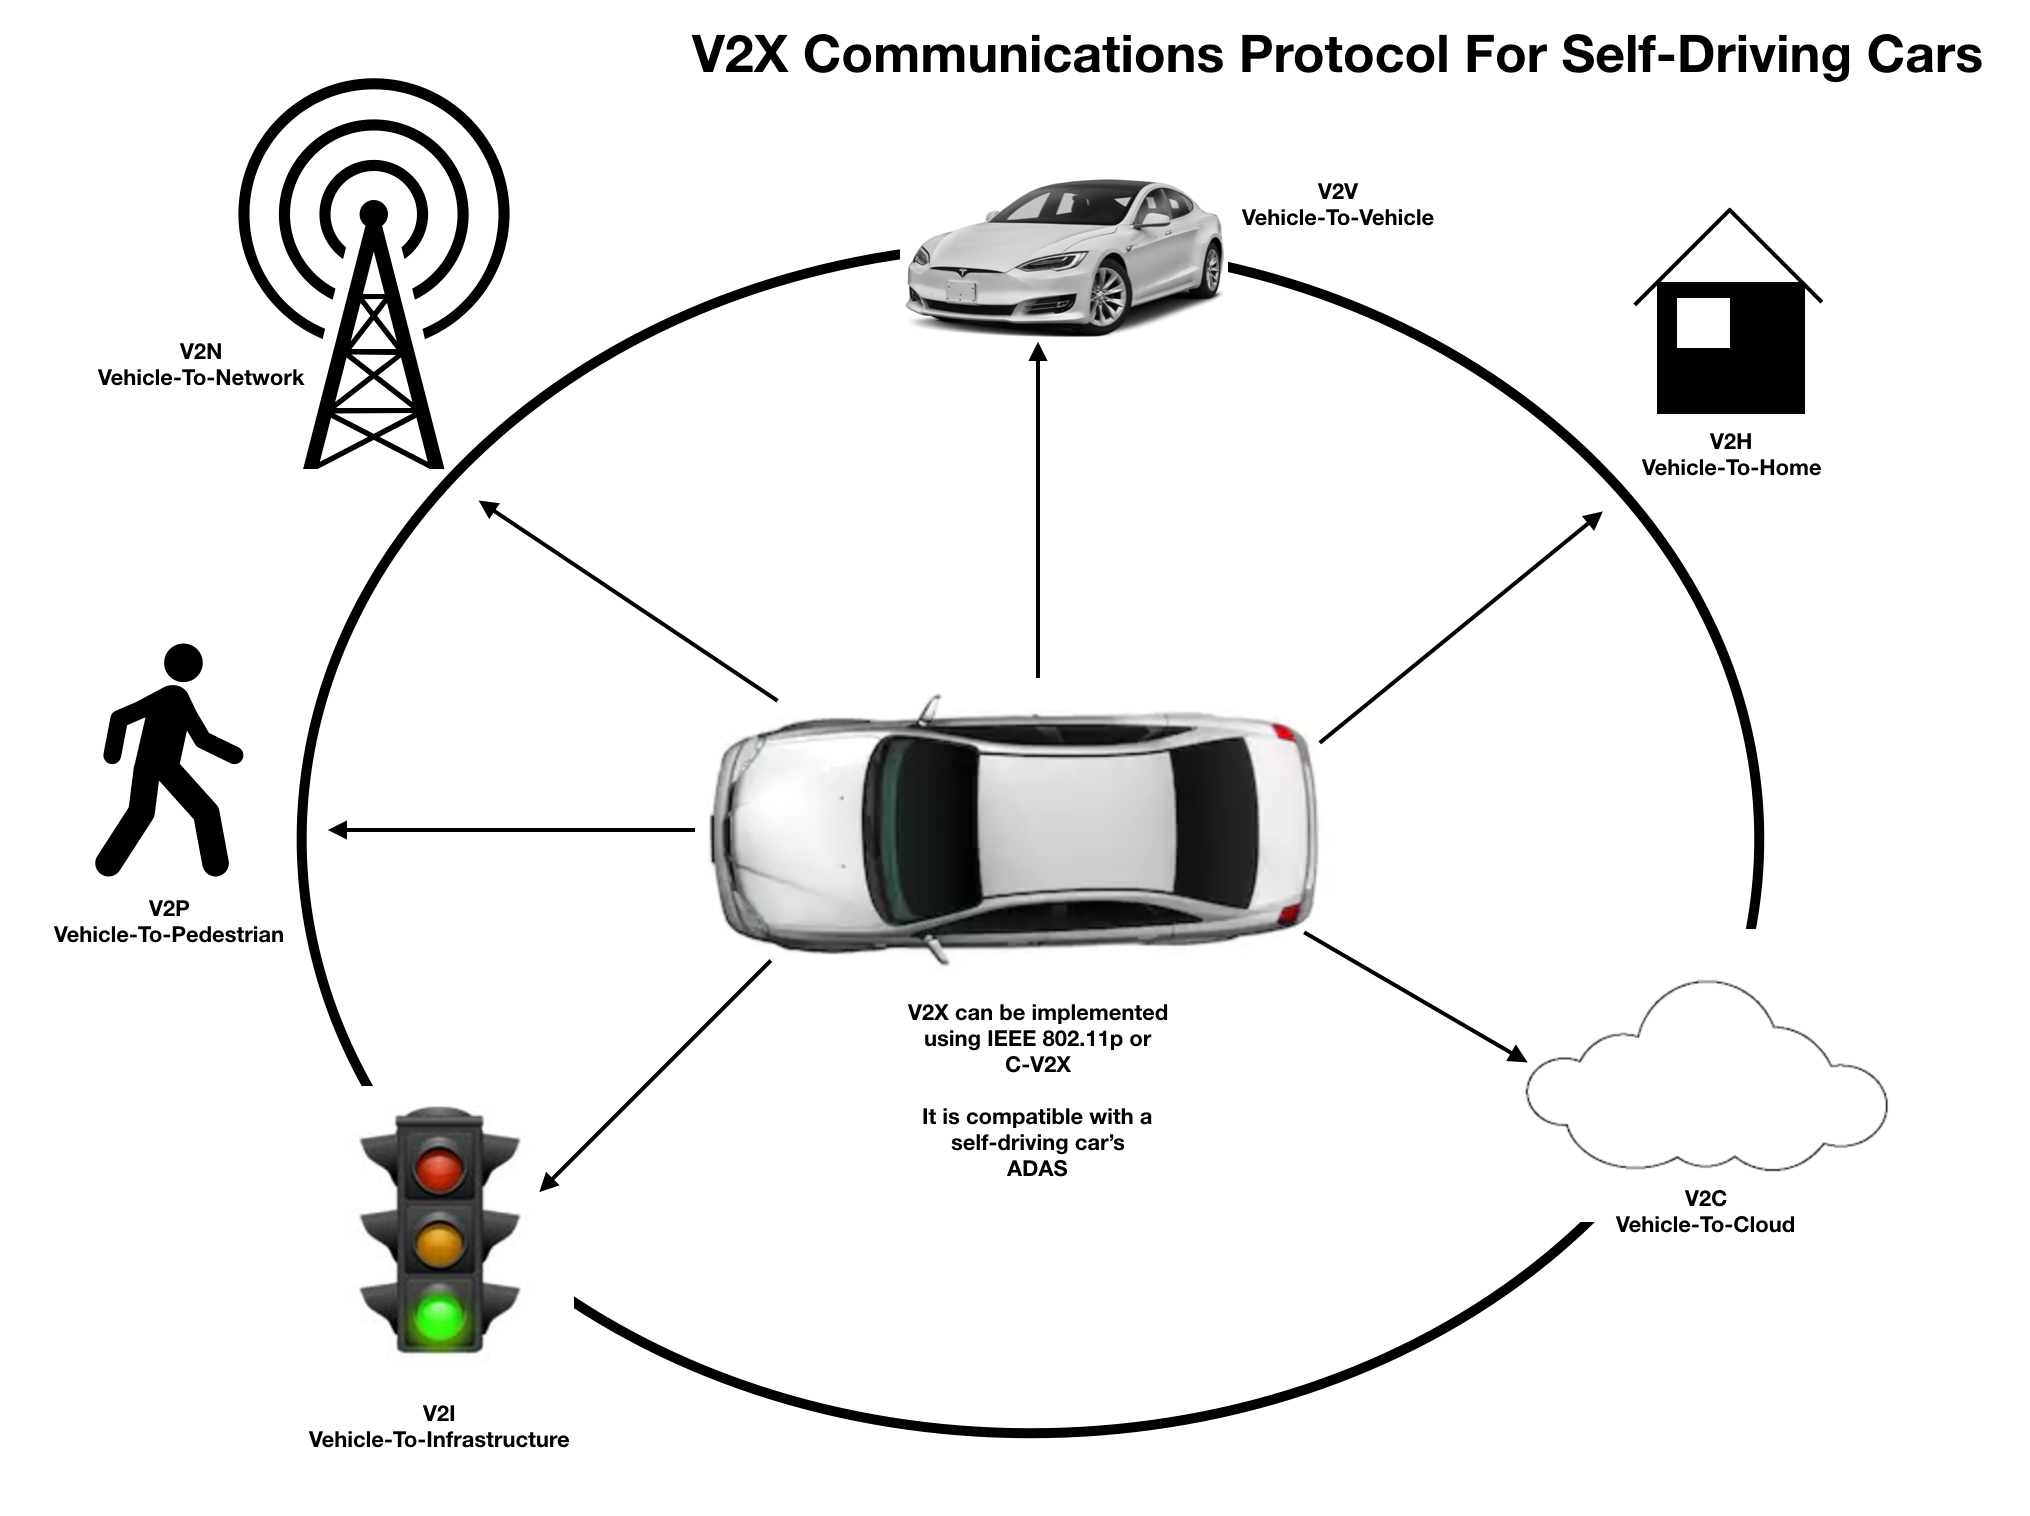 Improving Self-Driving Car Safety And Reliability With V2X Protocols | by Vince Tabora | Self-Driving Cars | Medium